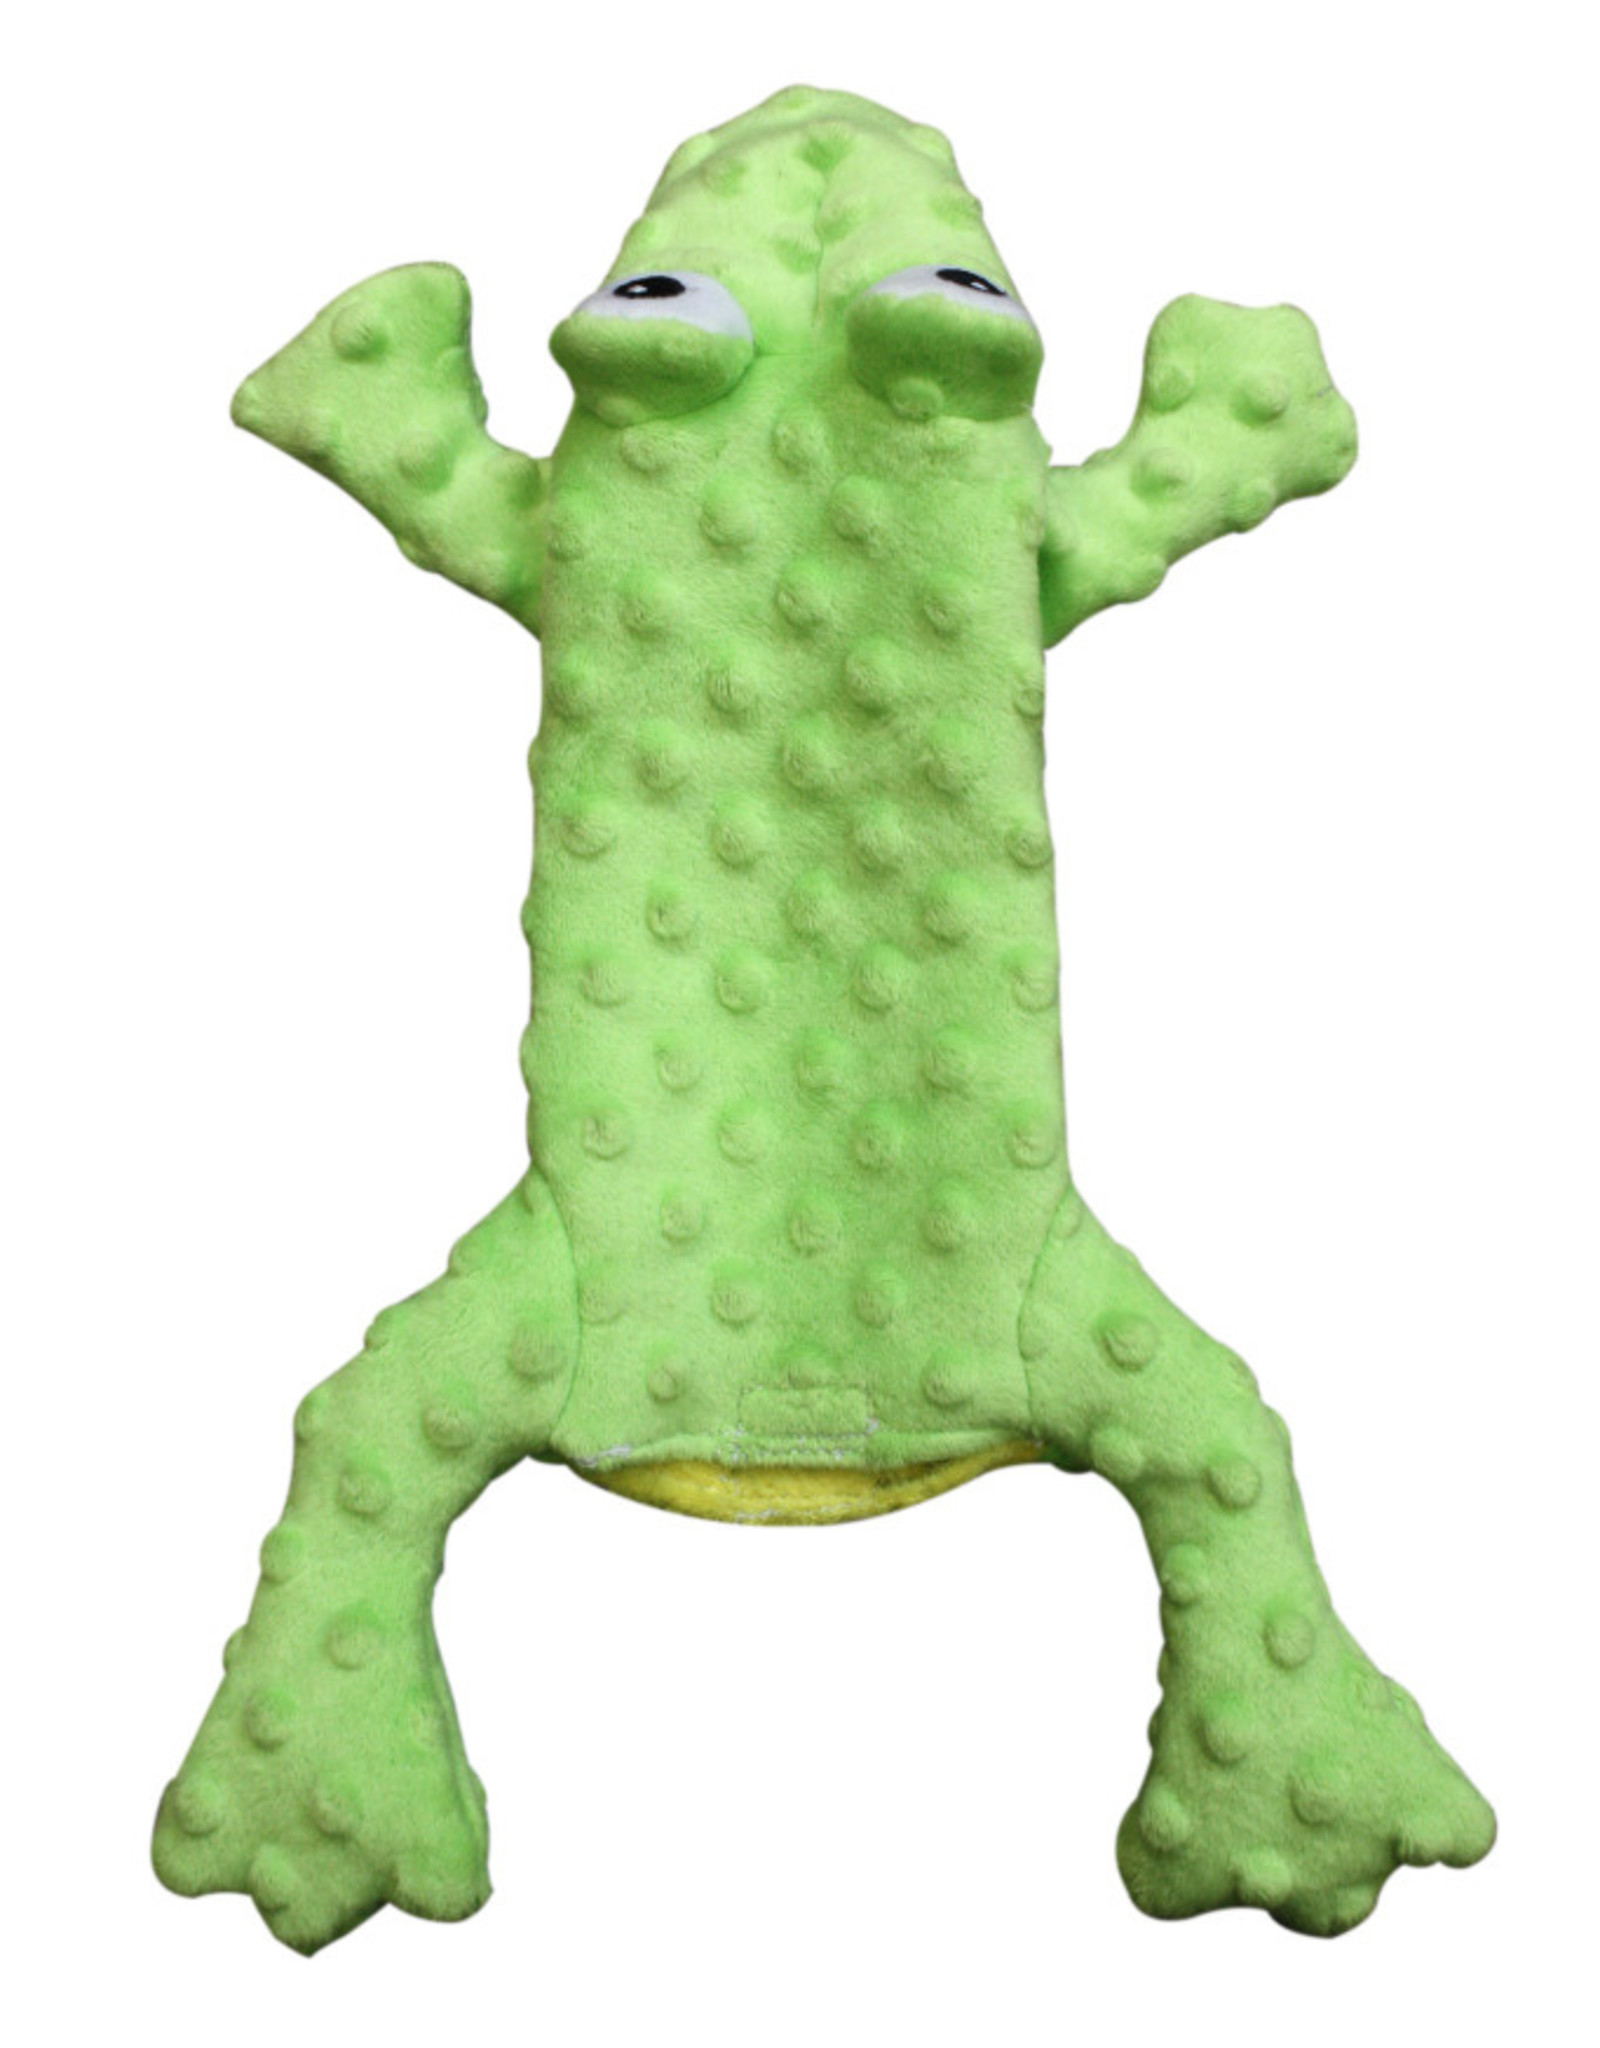 ETHICAL PRODUCTS, INC. SKINNEEEZ  EXTREME STUFFER FROG 14"